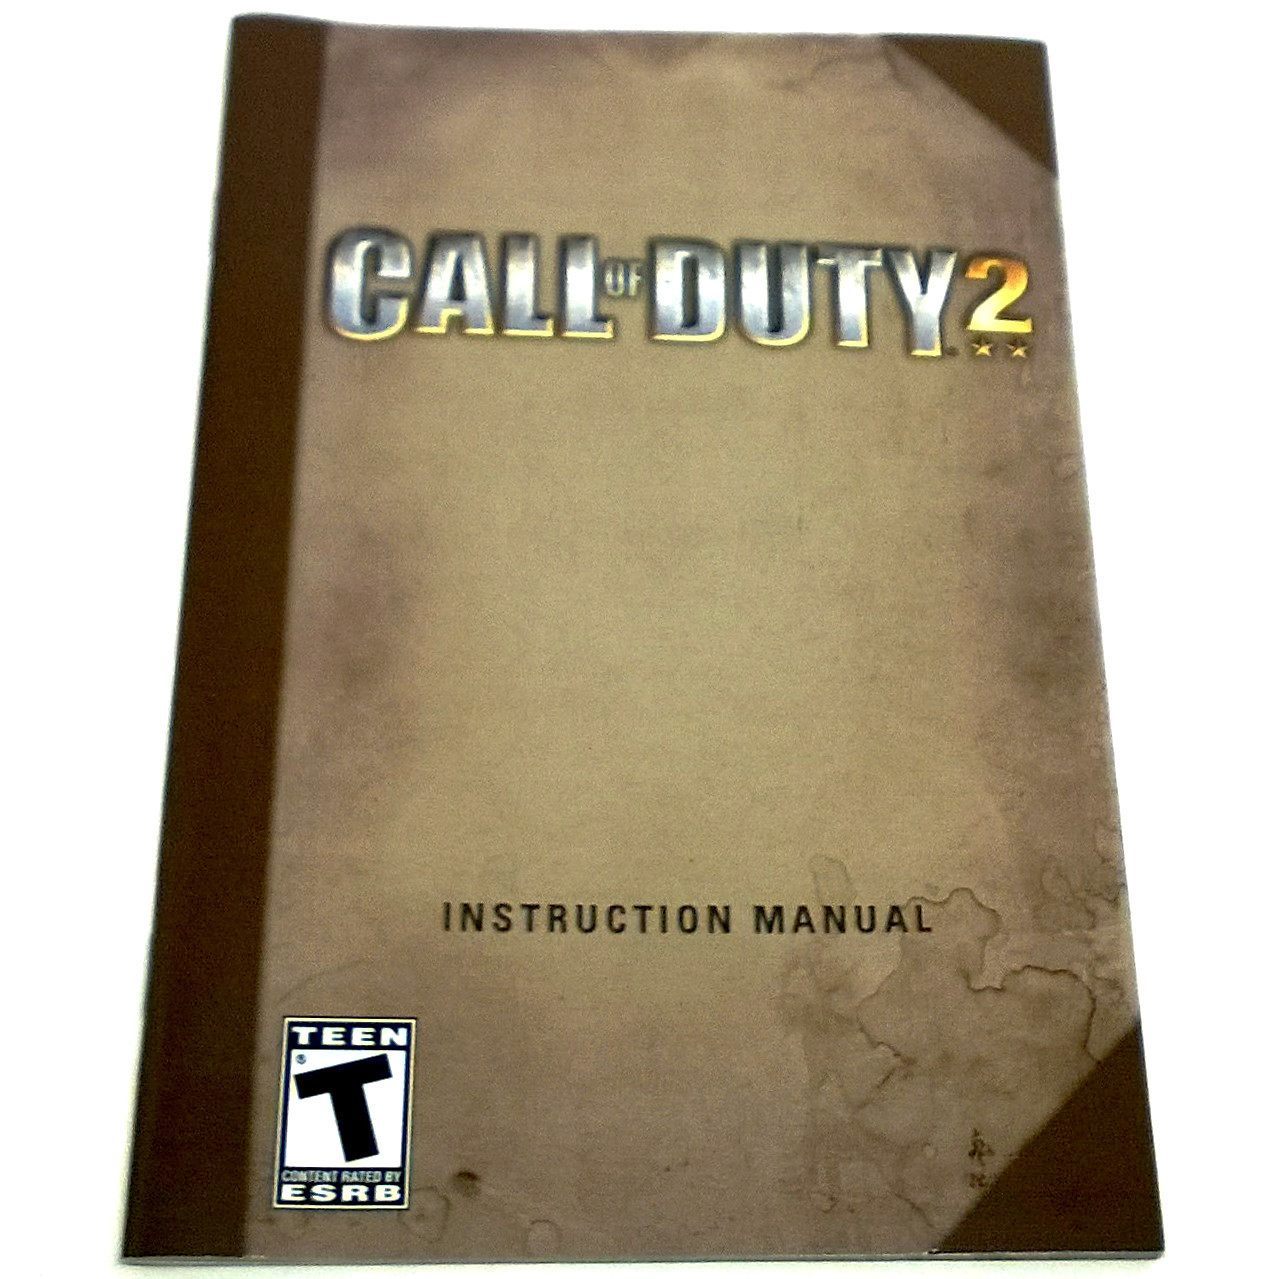 Call of Duty 2 - PC CD-Rom Computer game + case 5030917031885